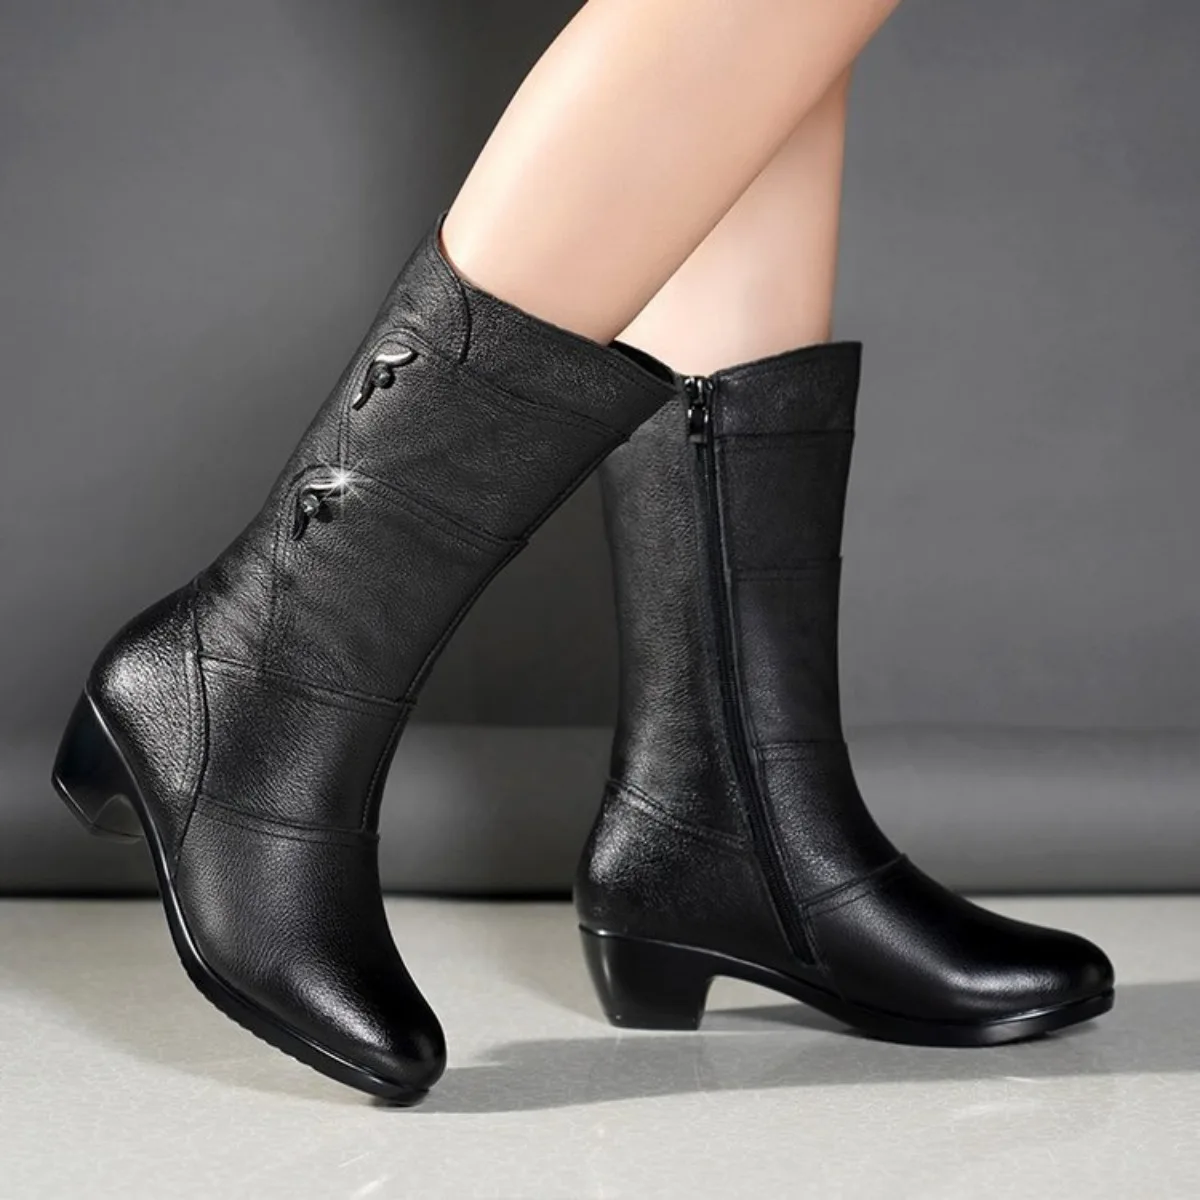 

Fashionable Women's Boots for Winter 2023 PU Leather All Black with High Heels Thick Sole Fashion Concise Casual Platform Shoes